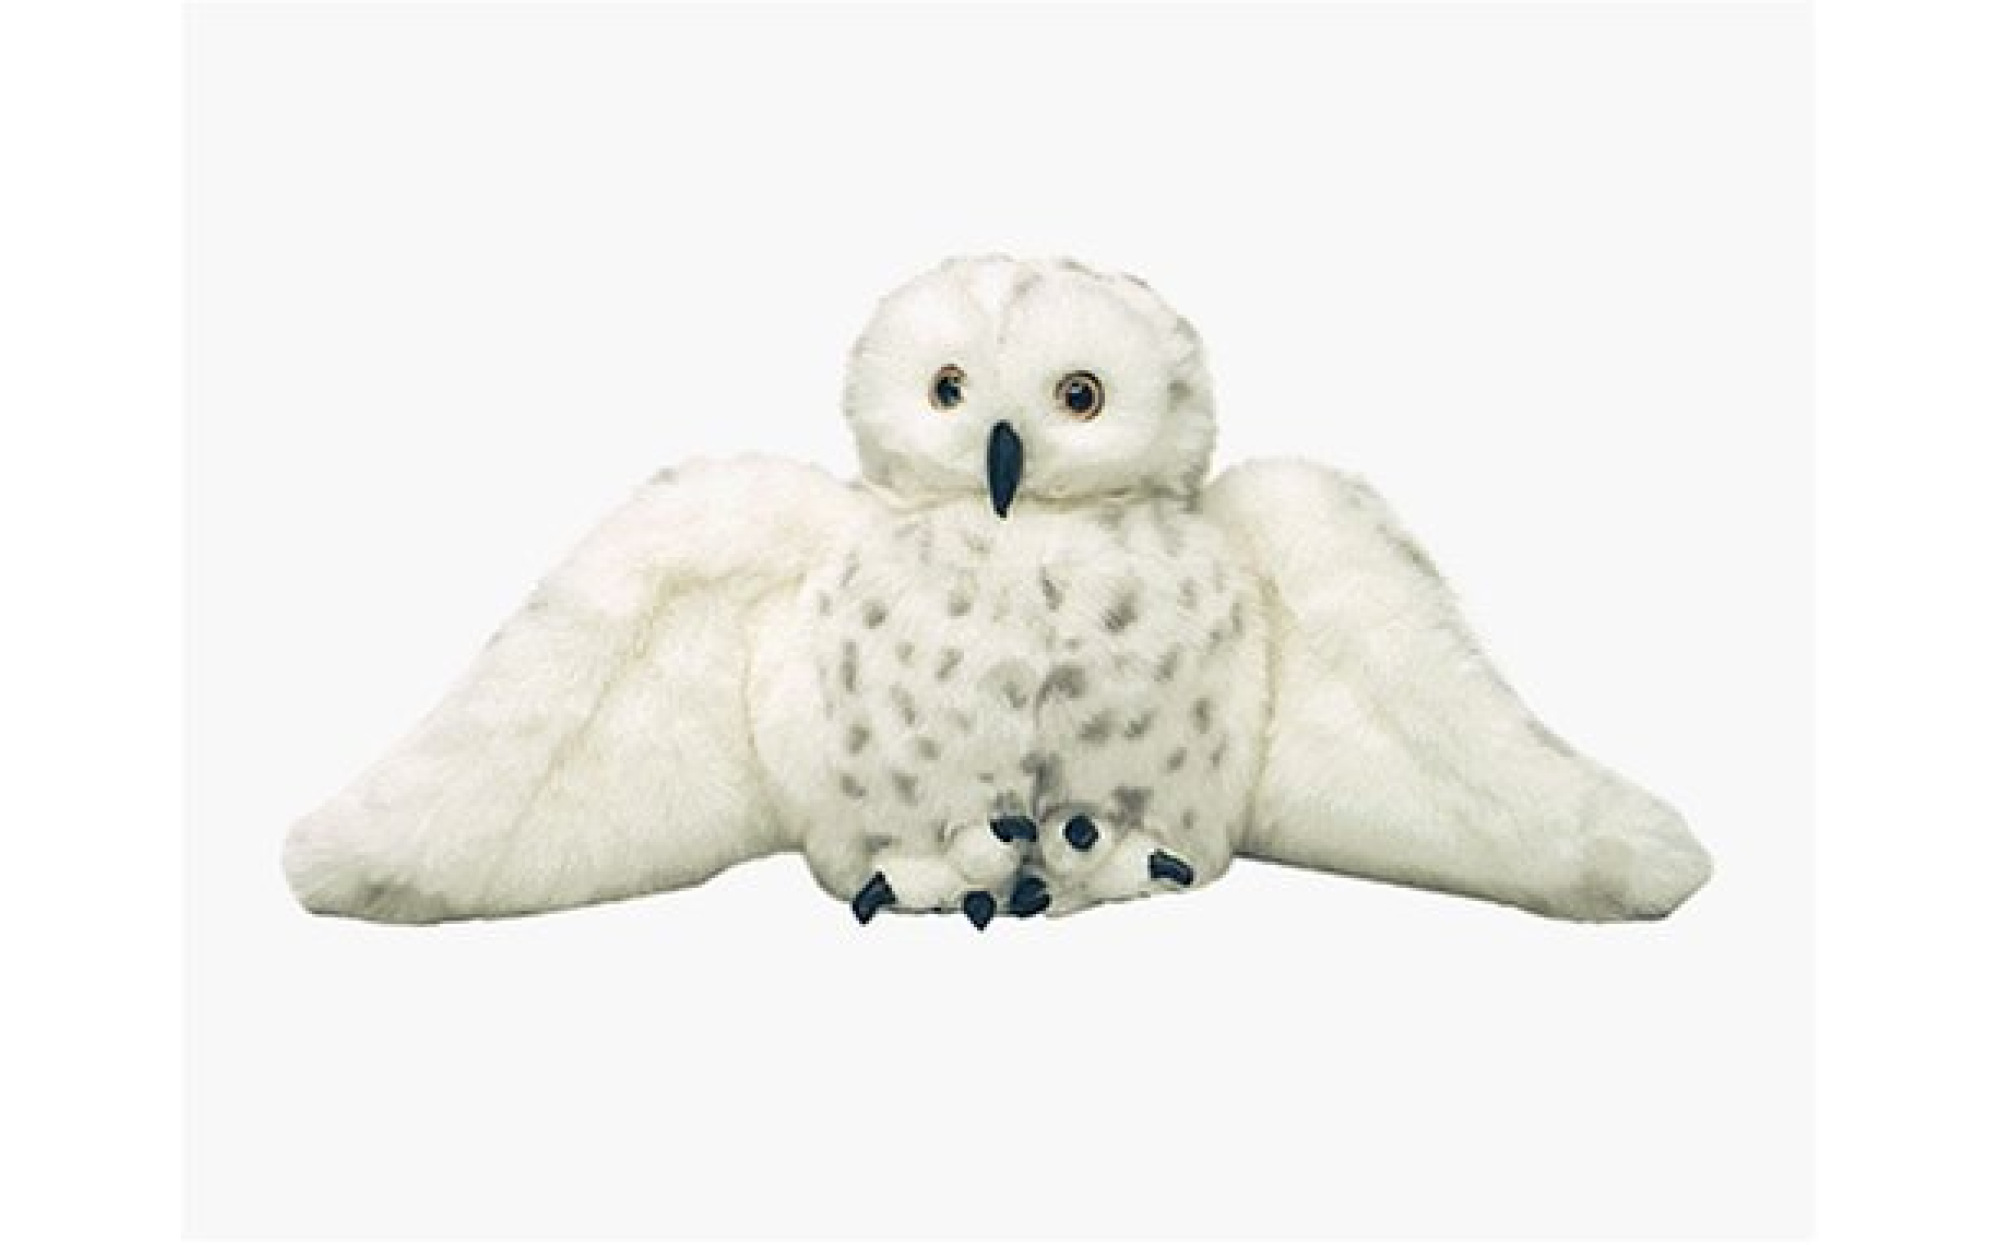 for sale online Snowy Owl Hand Puppet With Head That Rotates by Folkmanis T2236 